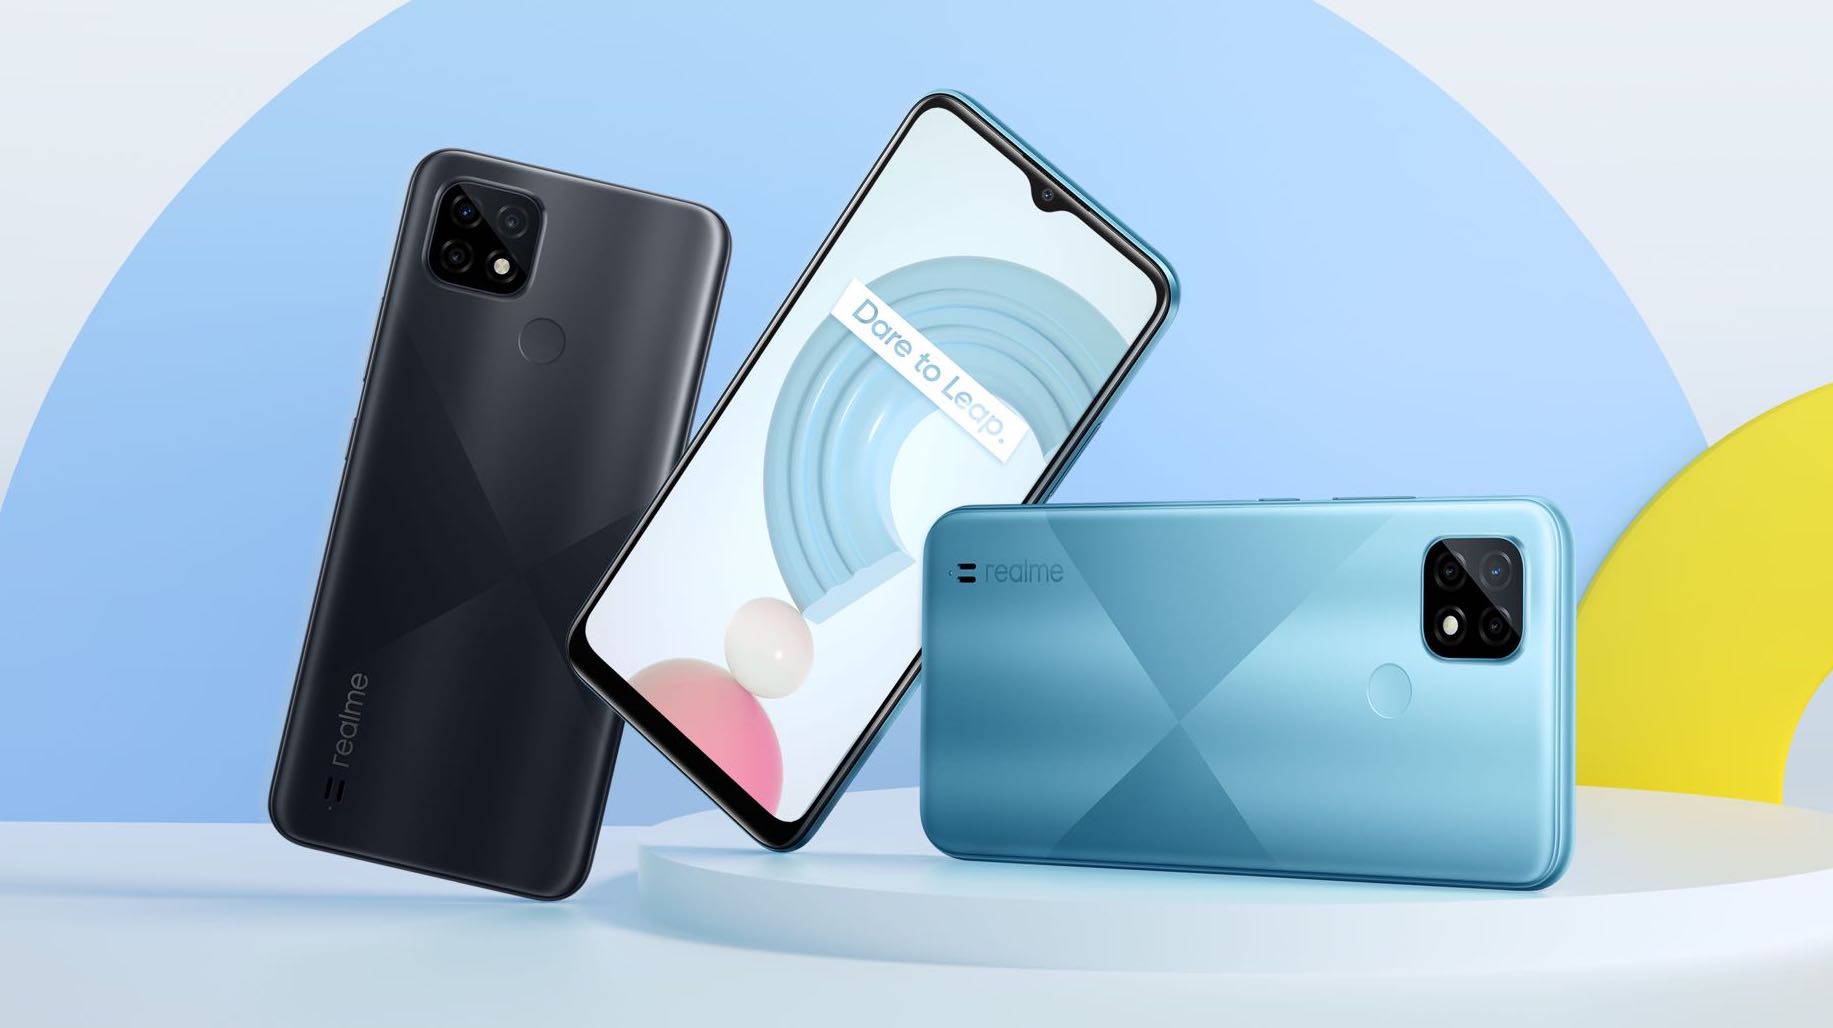 Another budget Realme began receiving Android 11 update with Realme UI 2.0 shell